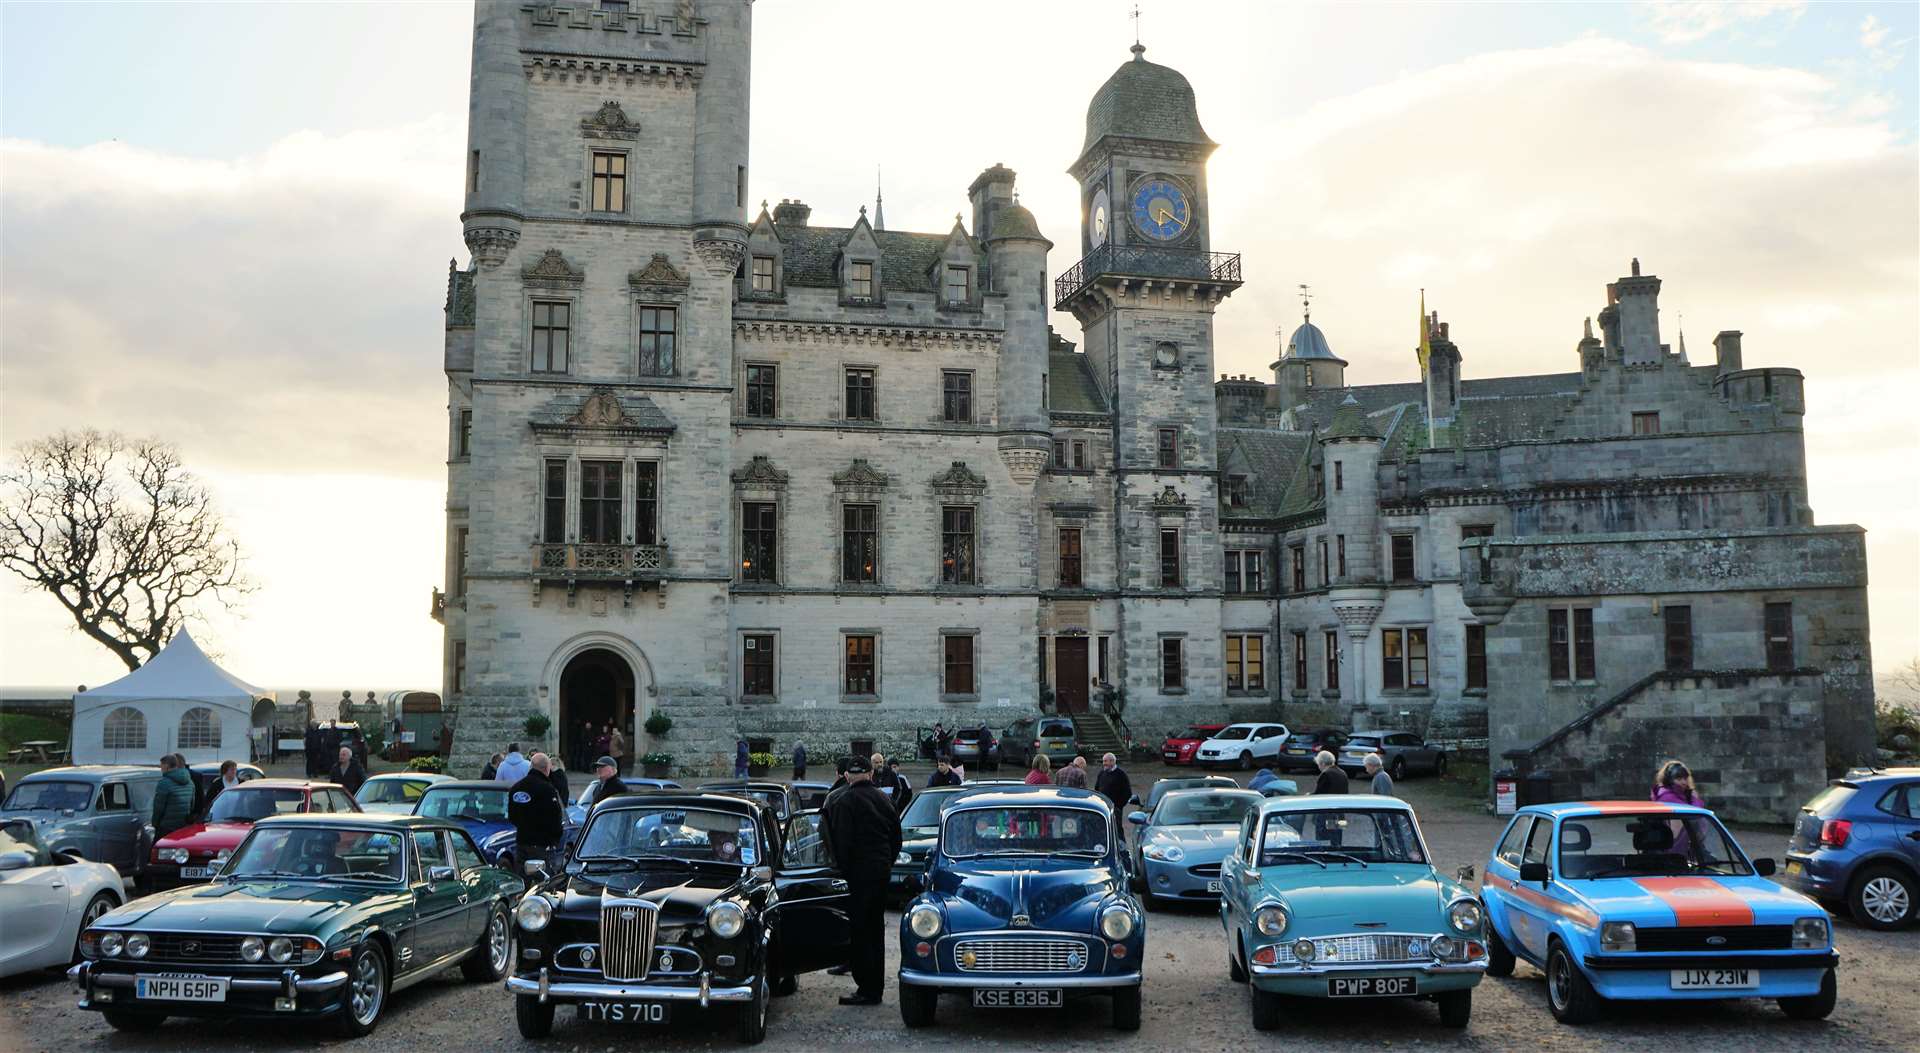 The cars lined up in neat rows in front of the majestic castle. Picture: DGS